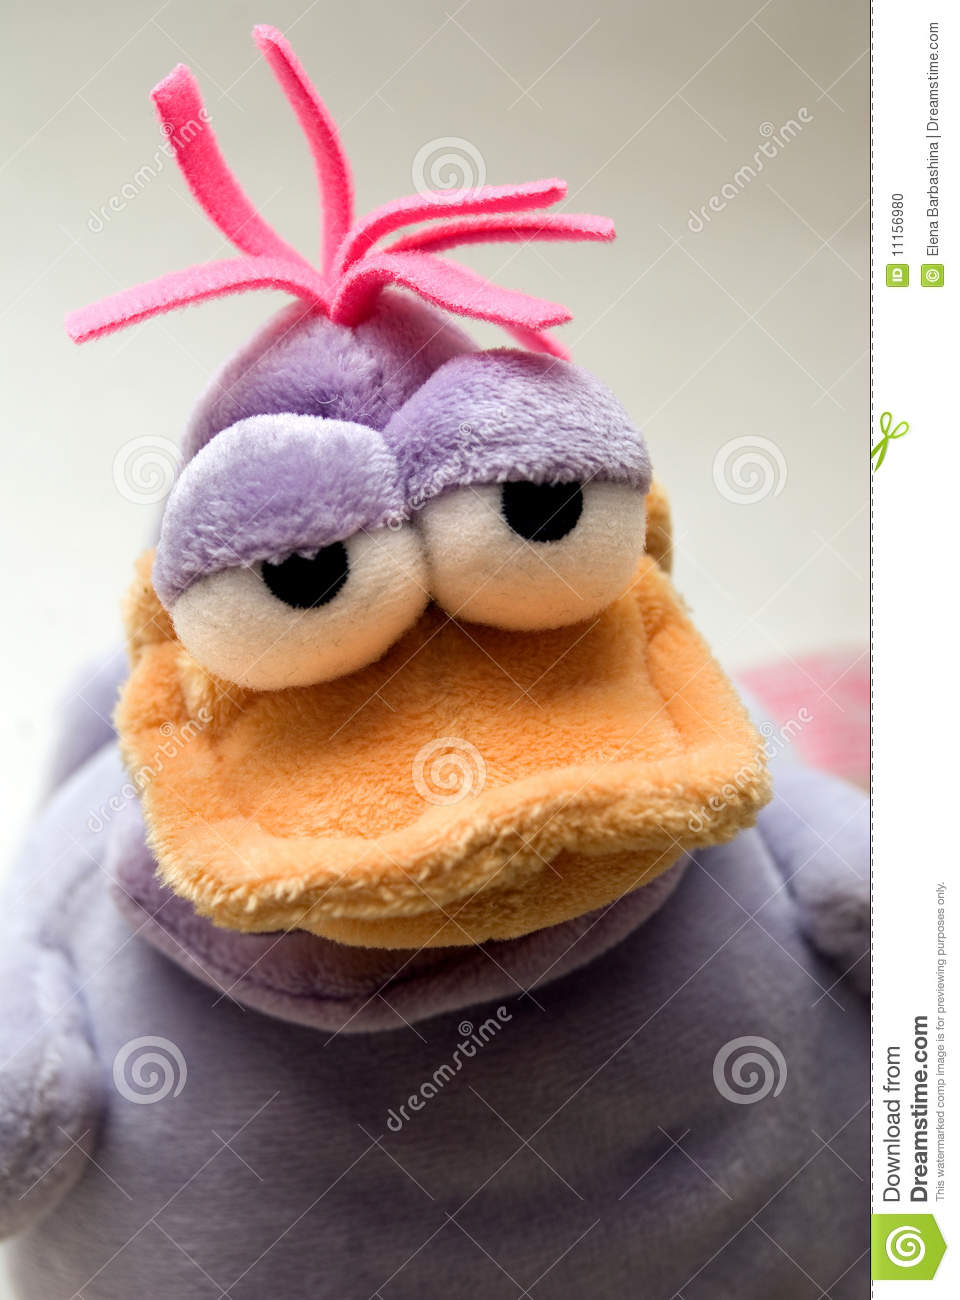 Sad Plush Violet Duck With Pink Hair Looking At You